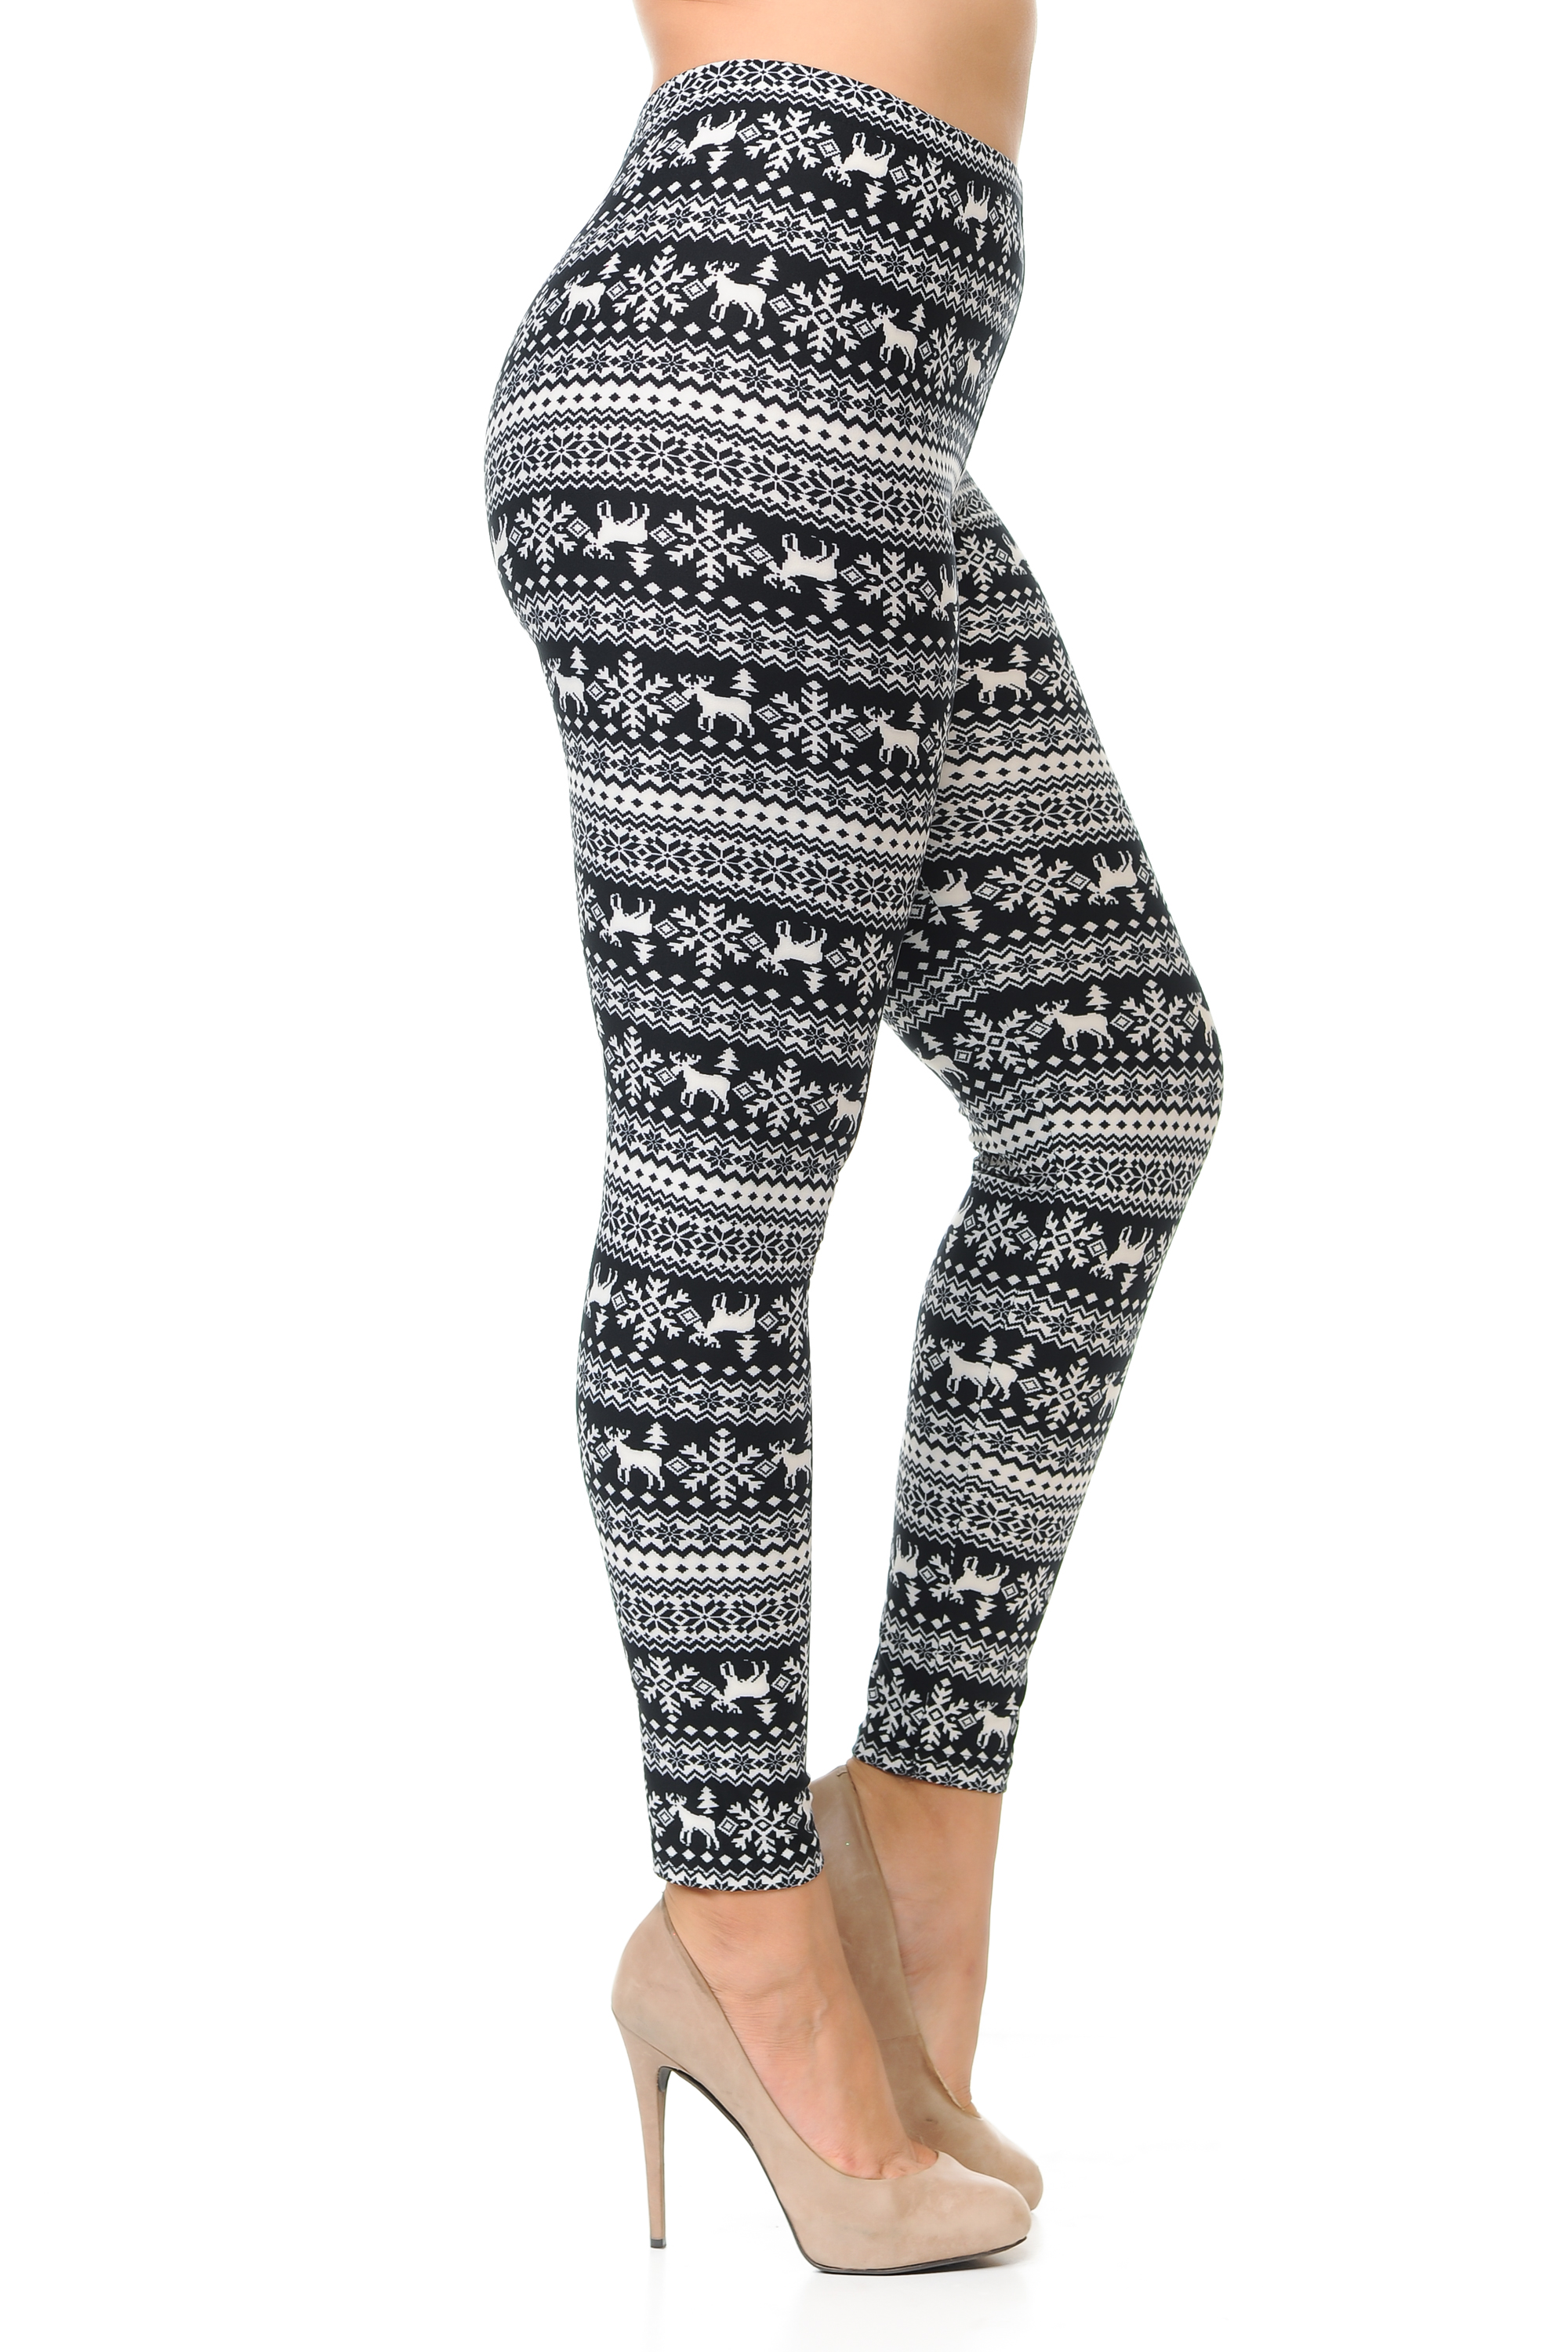 Wholesale Buttery Smooth  Reindeer and Snowflakes Christmas Extra Plus Size Leggings - 3X-5X